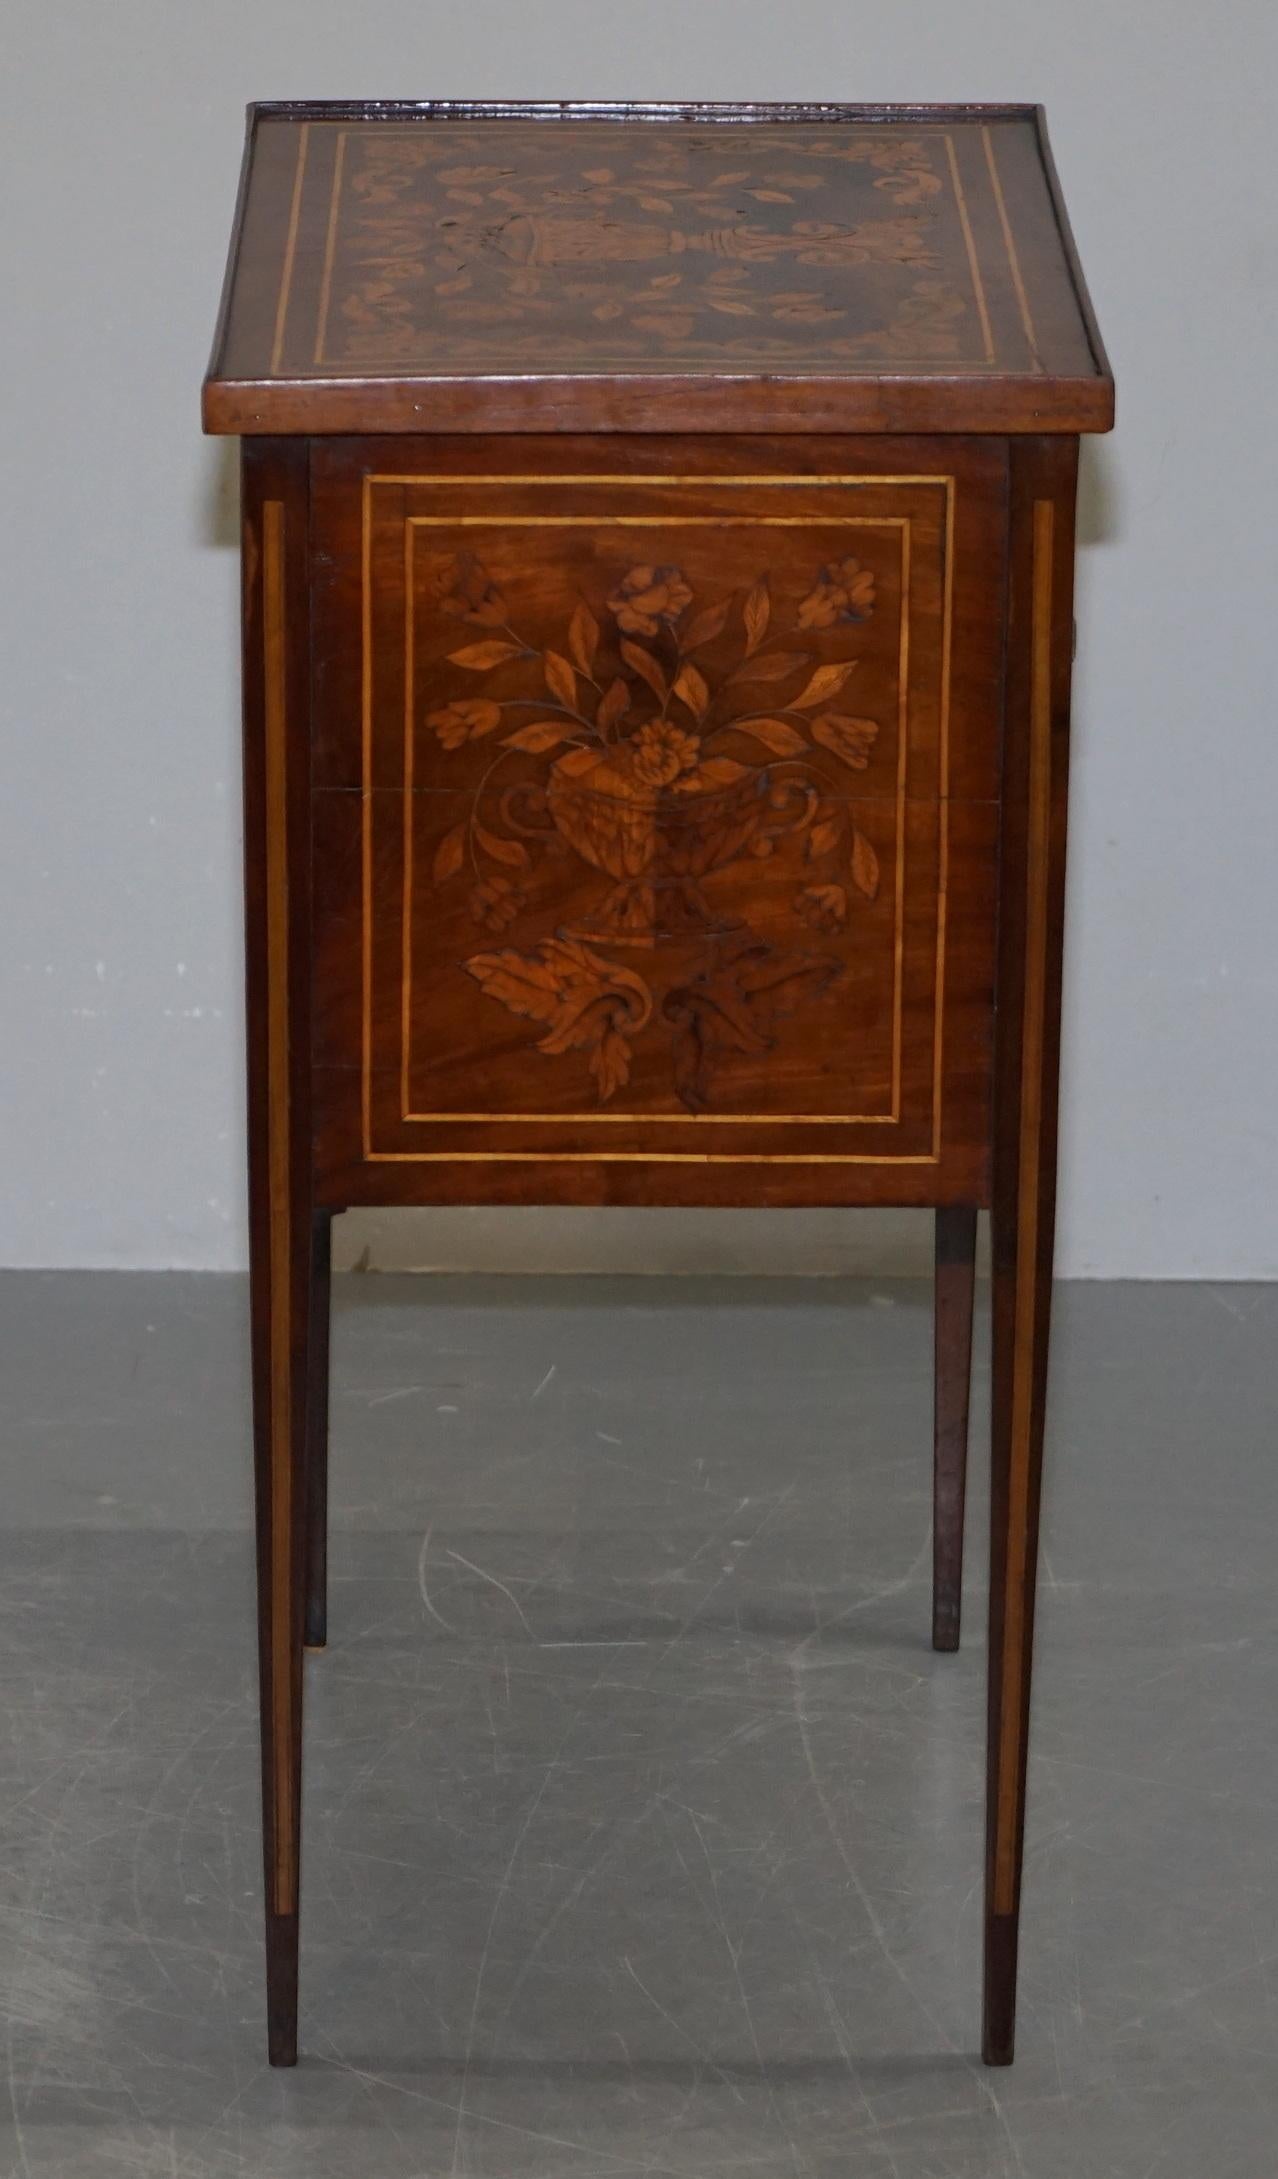 Rare 19th Century Dutch Marquetry Inlaid Side Table with Tambour Fronted Door For Sale 6